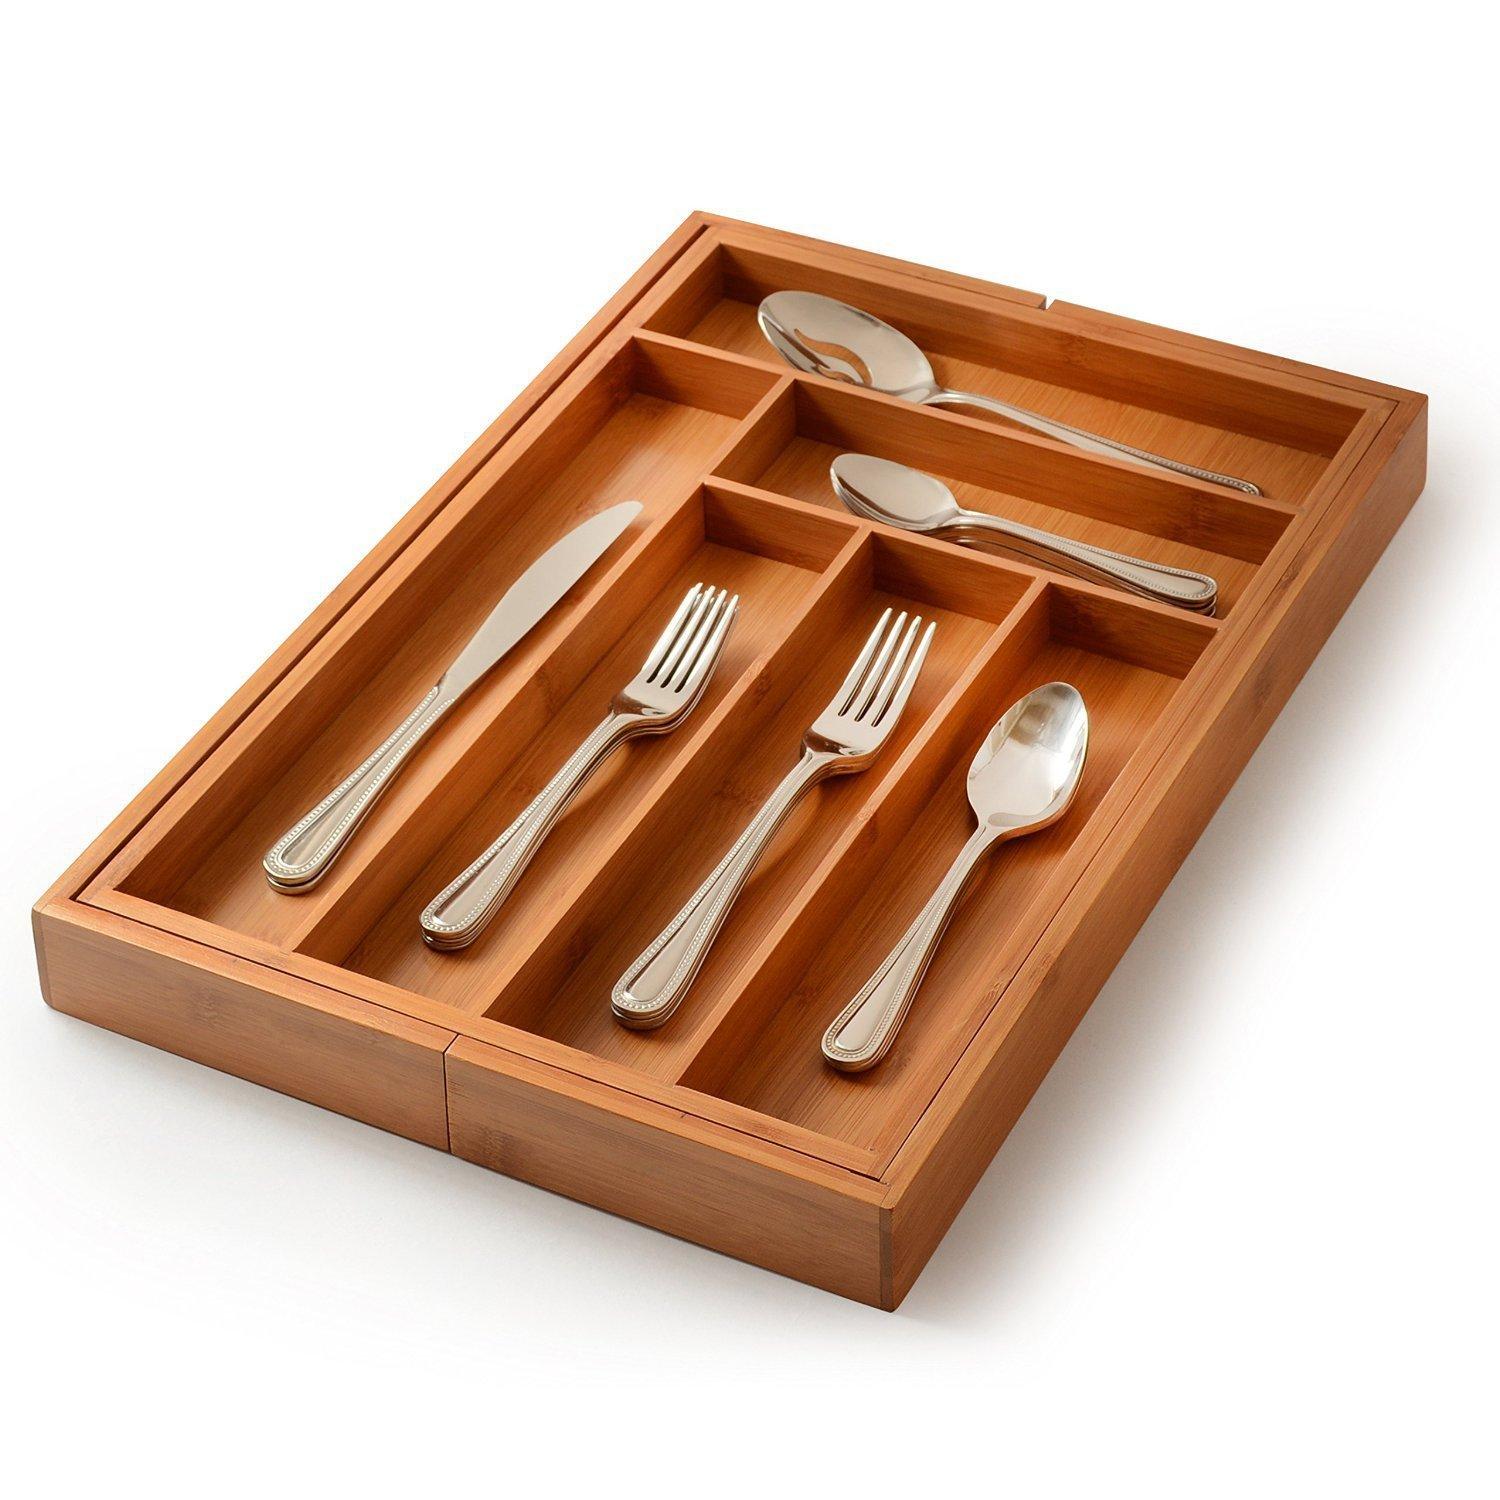 Buy Bamboo Expandable Kitchen Drawer Organizer Cutlery Tray 2